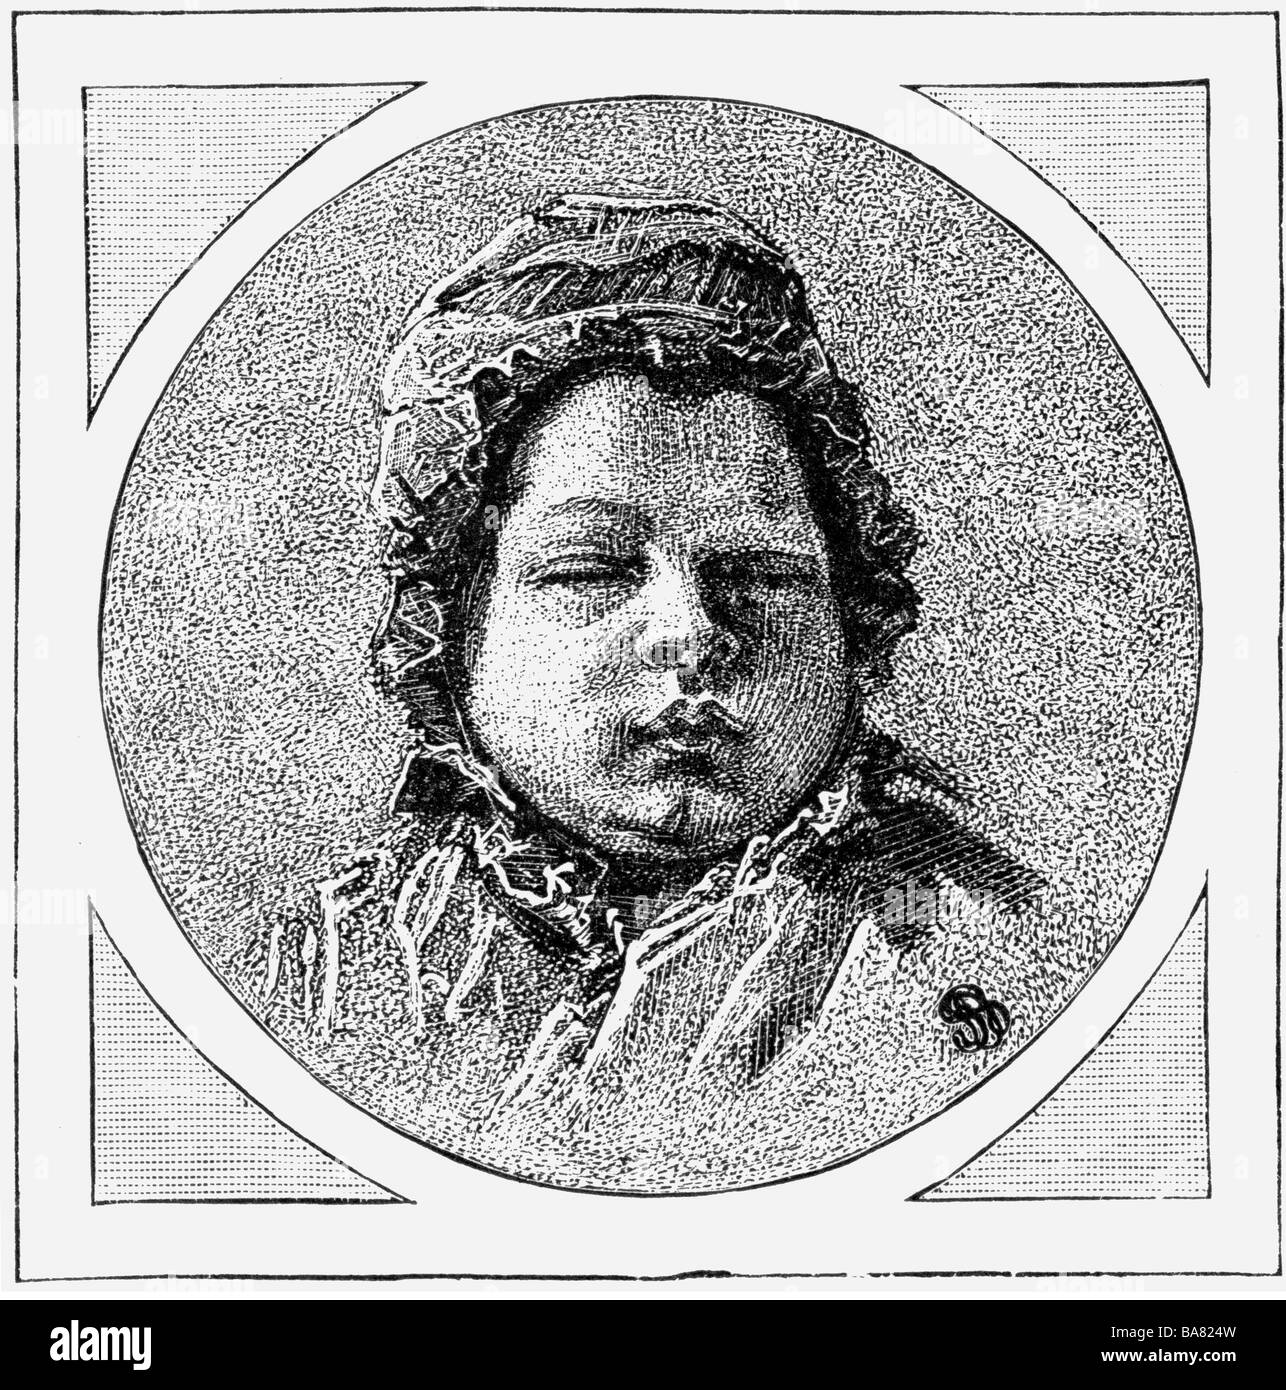 Napoleon Francois Joseph Charles, 20.3.1811 - 22.7.1832, King of Rome 1811 - 1814, Duke of Reichstadt 1817 - 1832, portrait, as child, wood engraving after drawing by Pierre Paul Prudhon, 1811, , Stock Photo